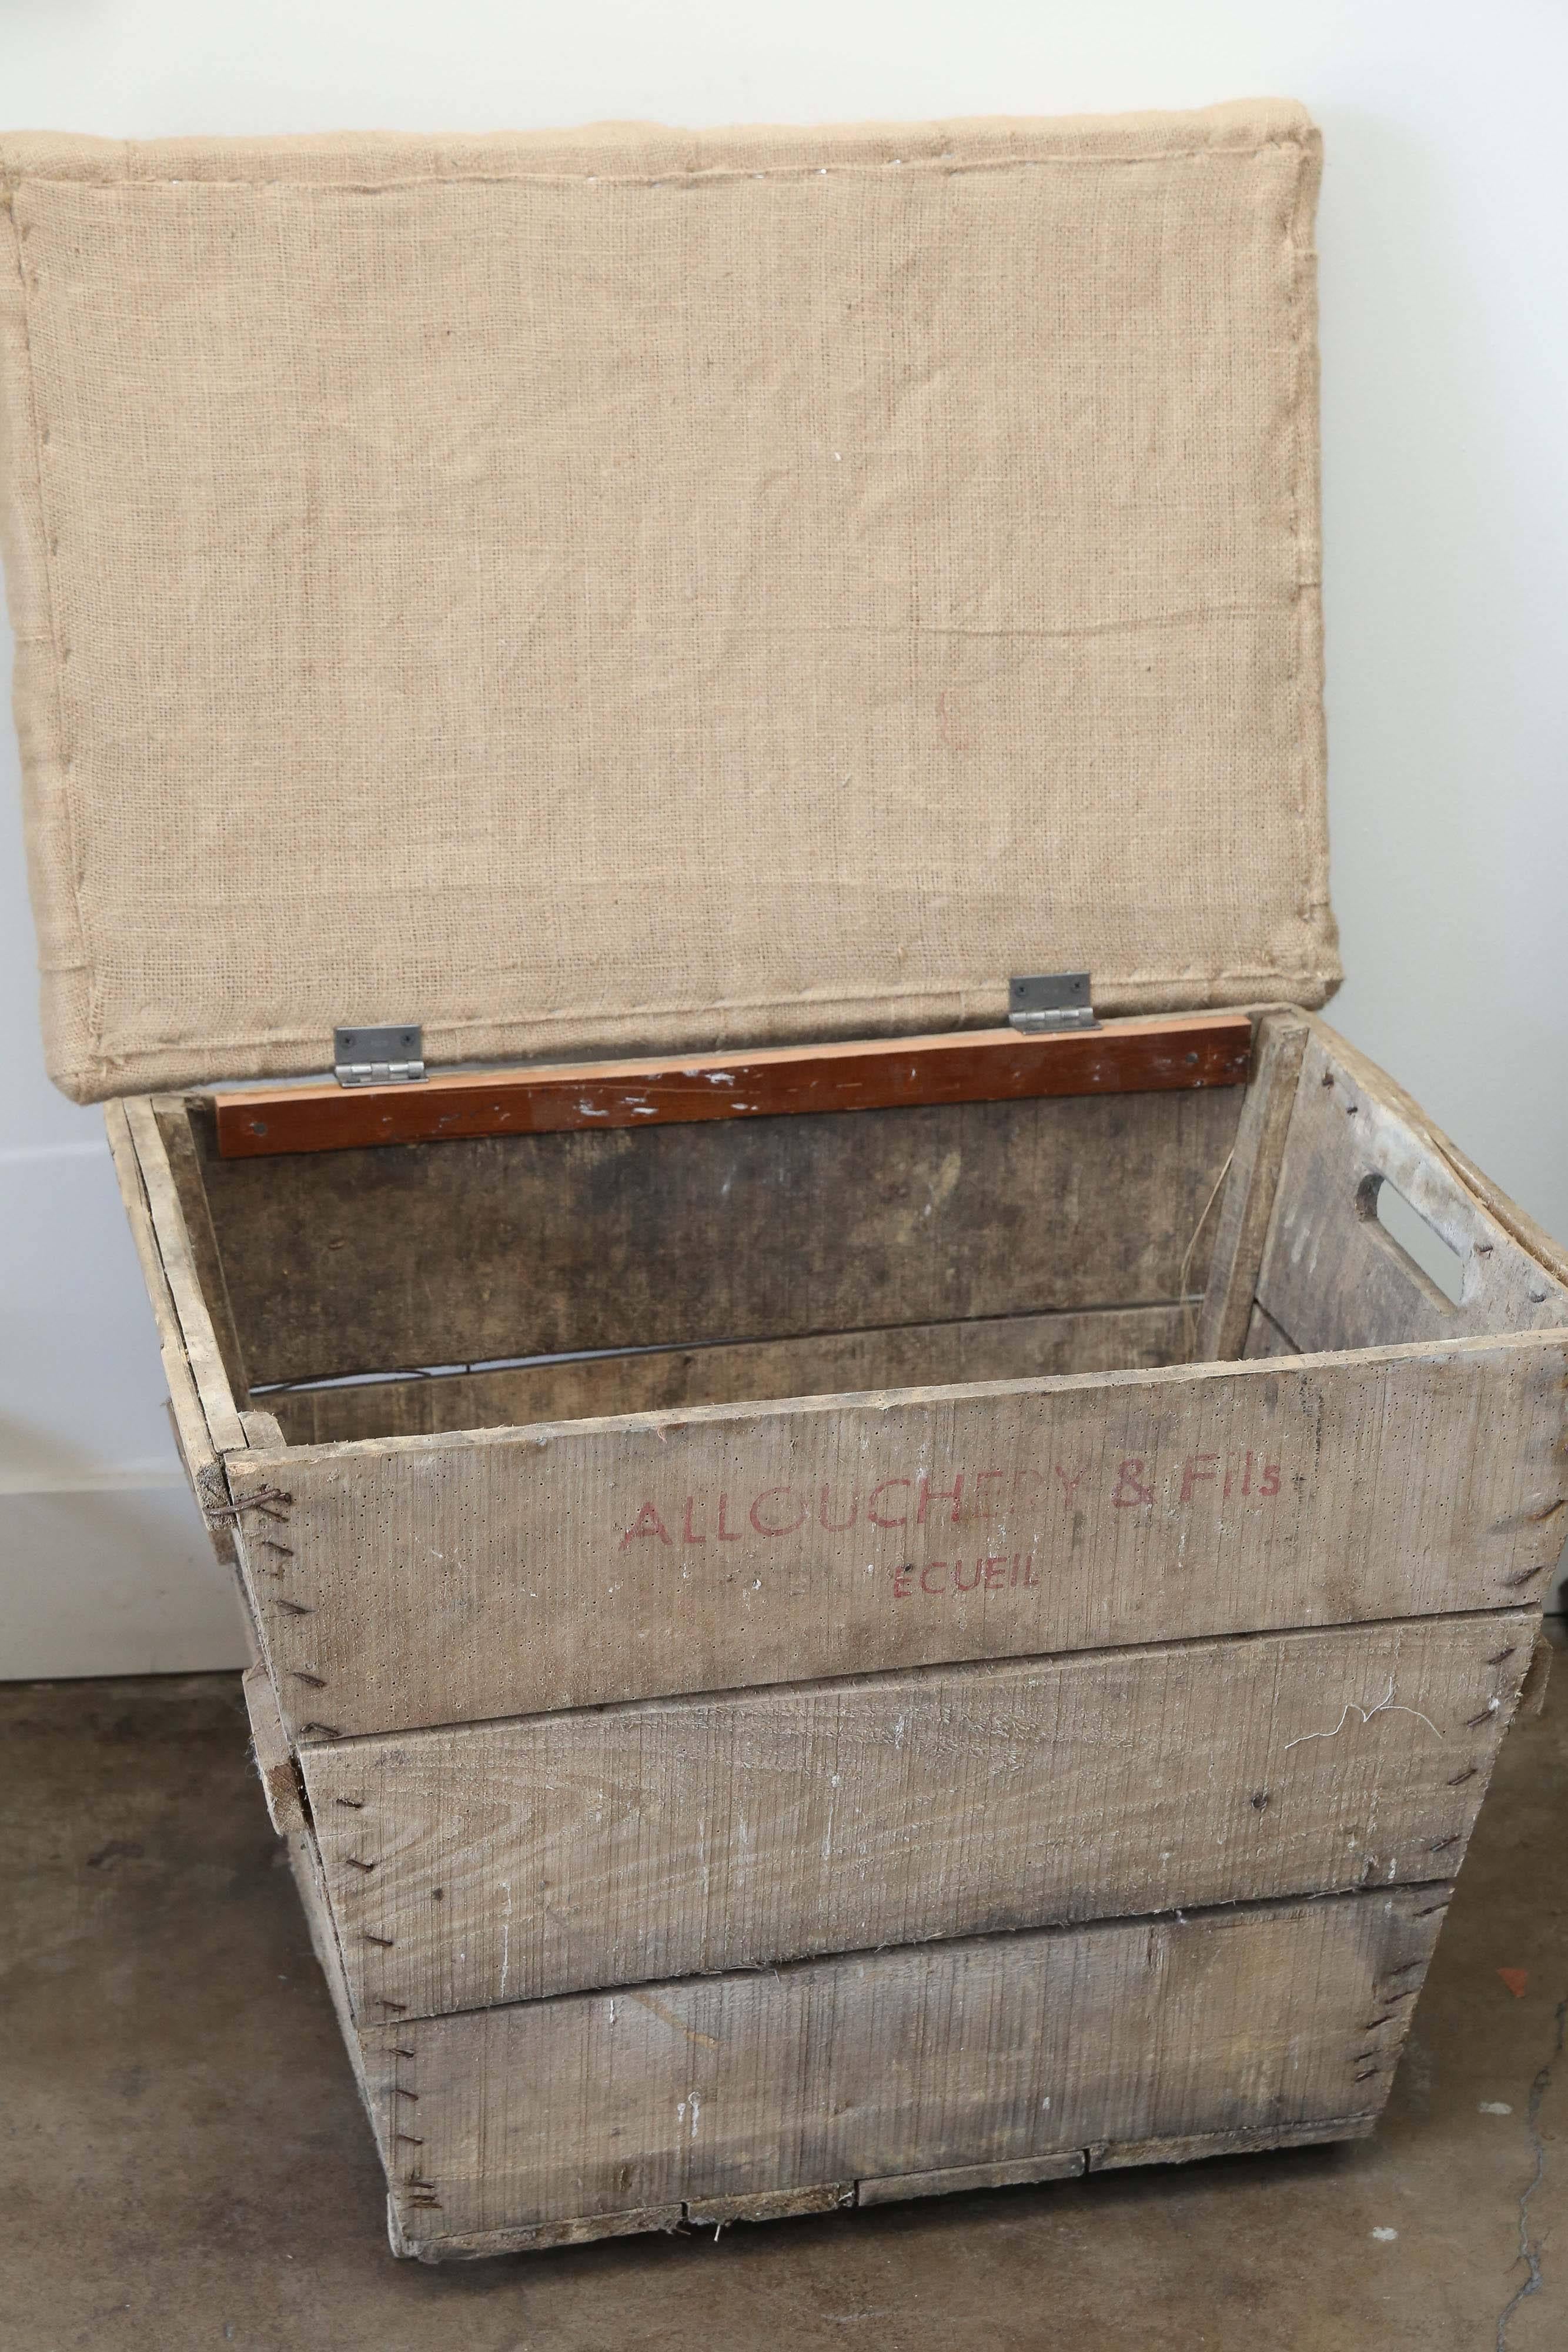 Late 19th Century 19th Century Upholstered French Champagne Crates